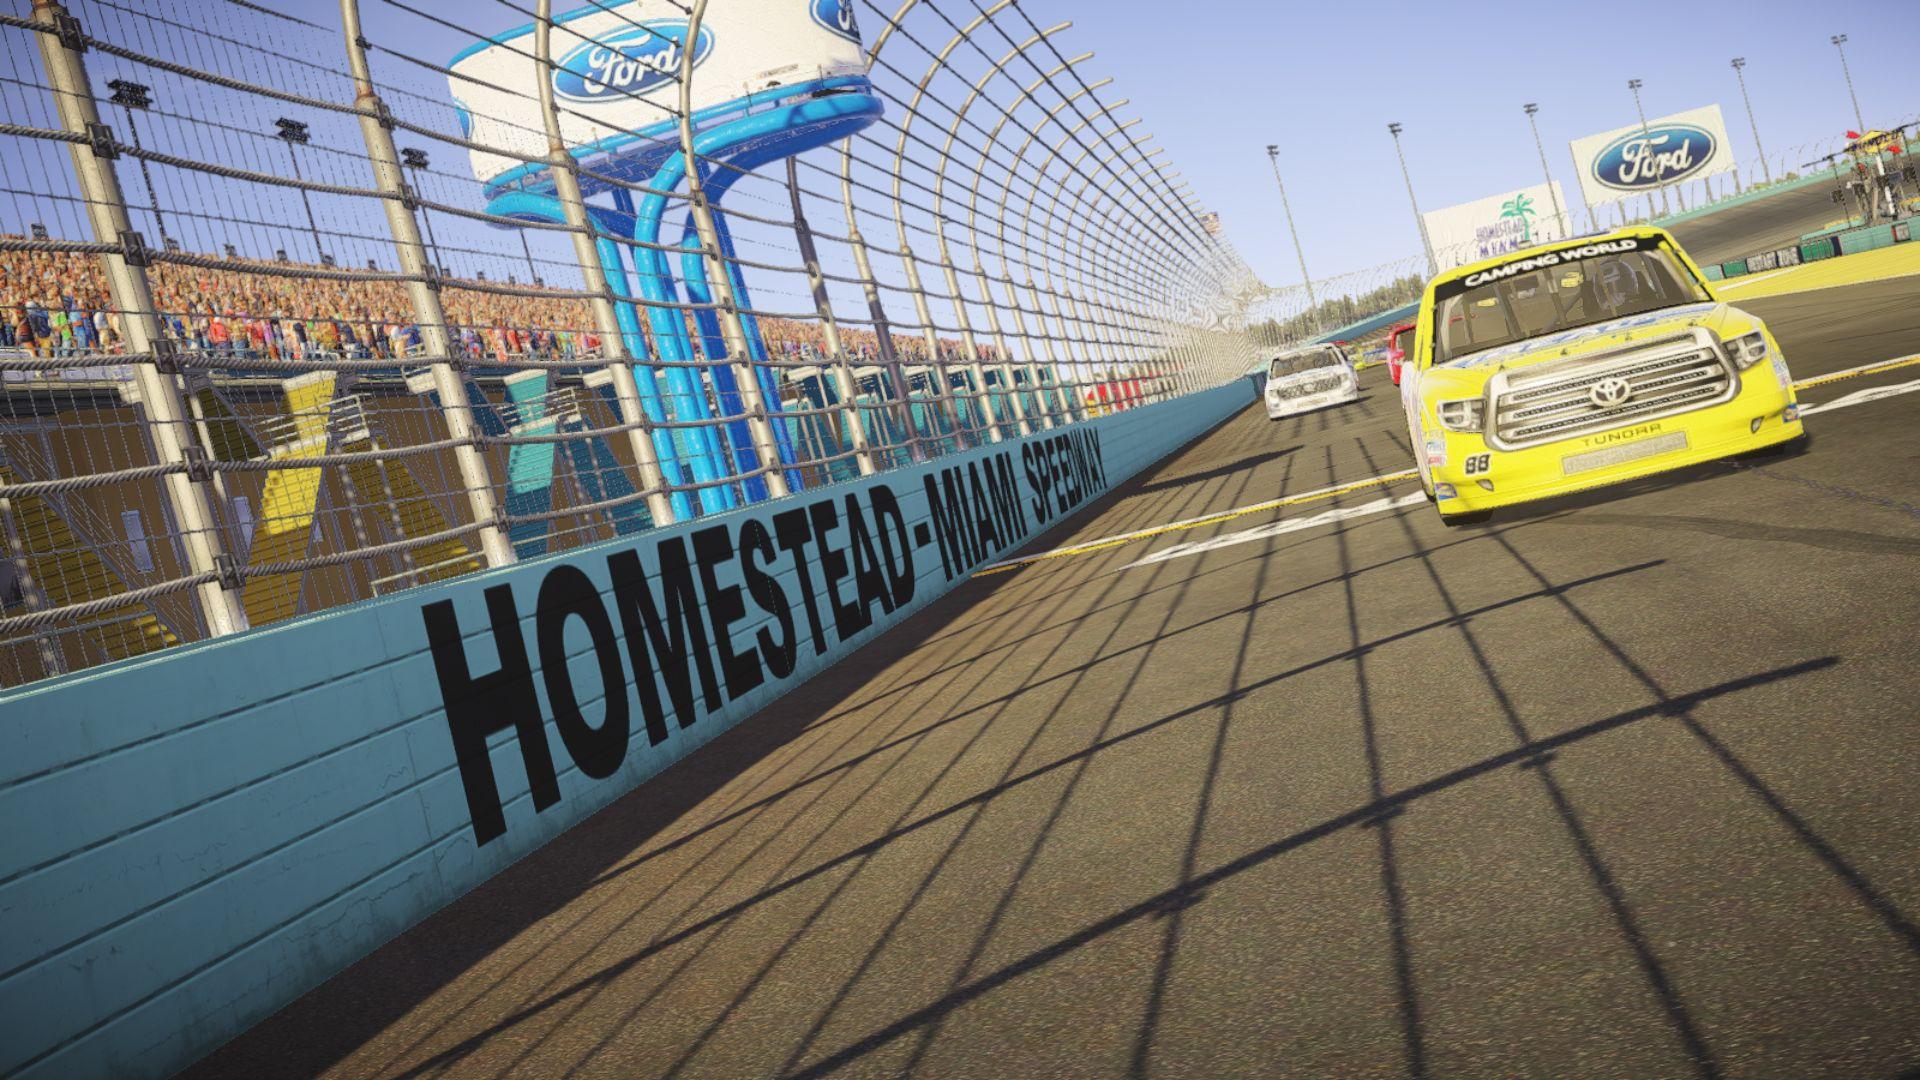 NASCAR Heat 2 Covers All Three National Series, Brings Back Couch